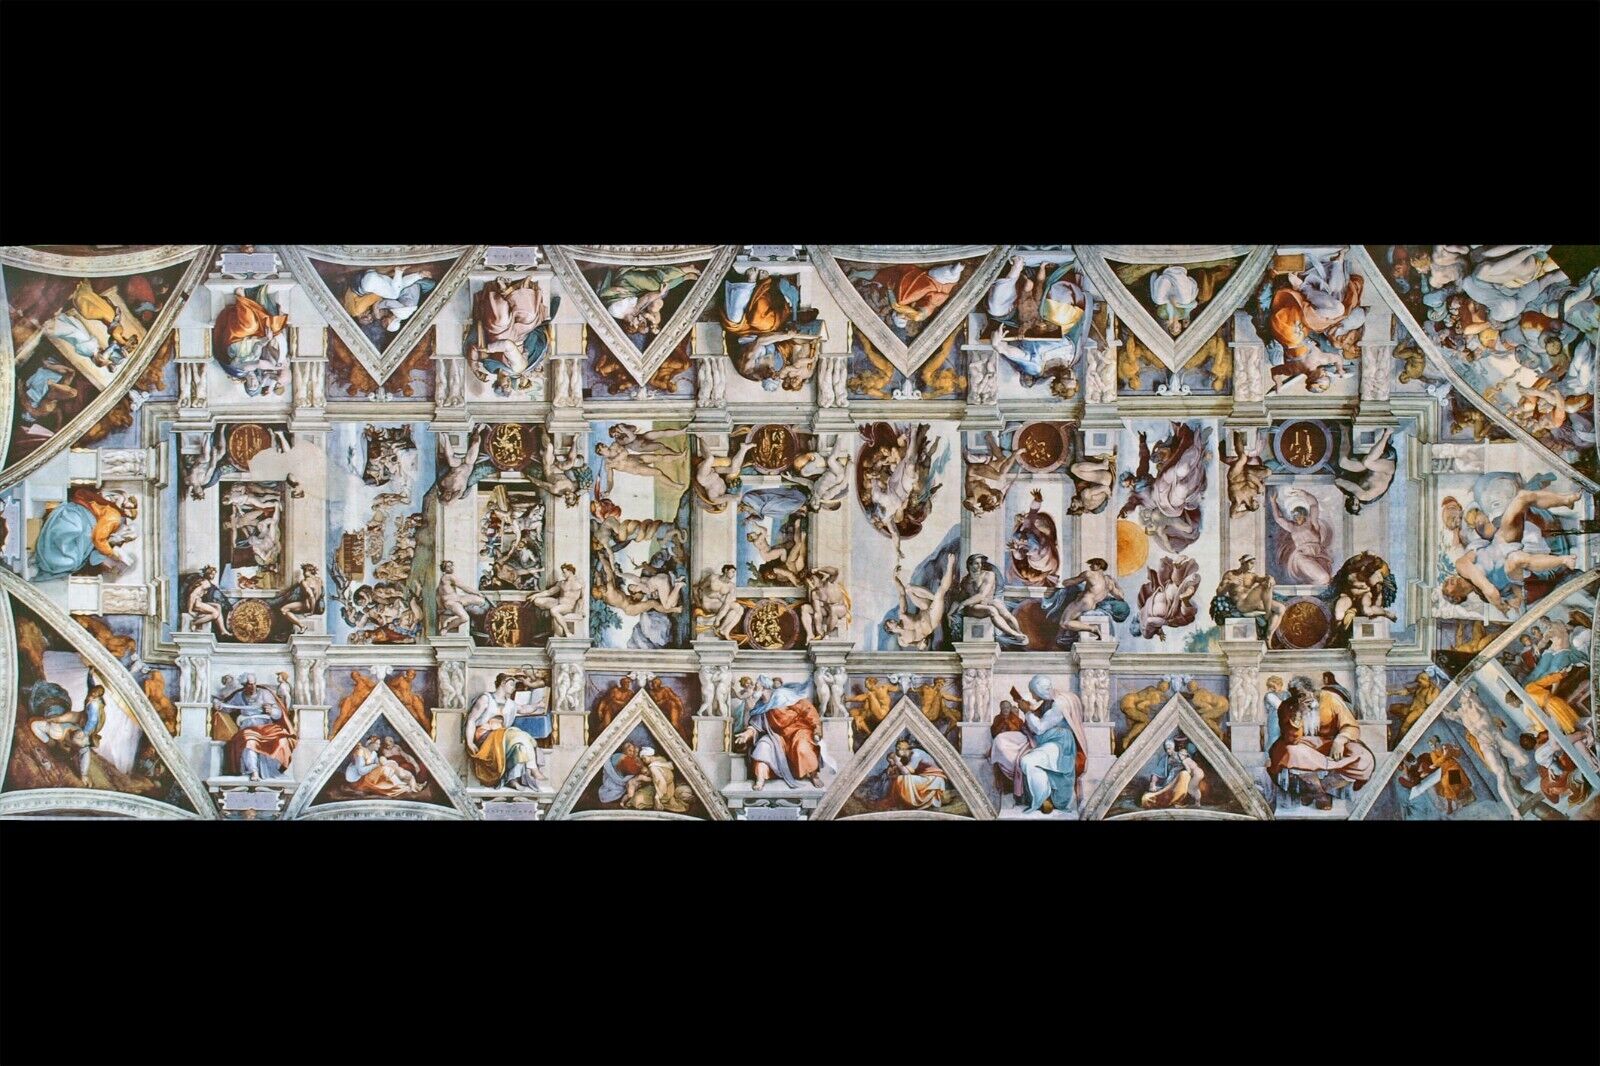 Poster, Many Sizes; Full Sistine Chapel Ceiling by Michelangelo (1508-1512)